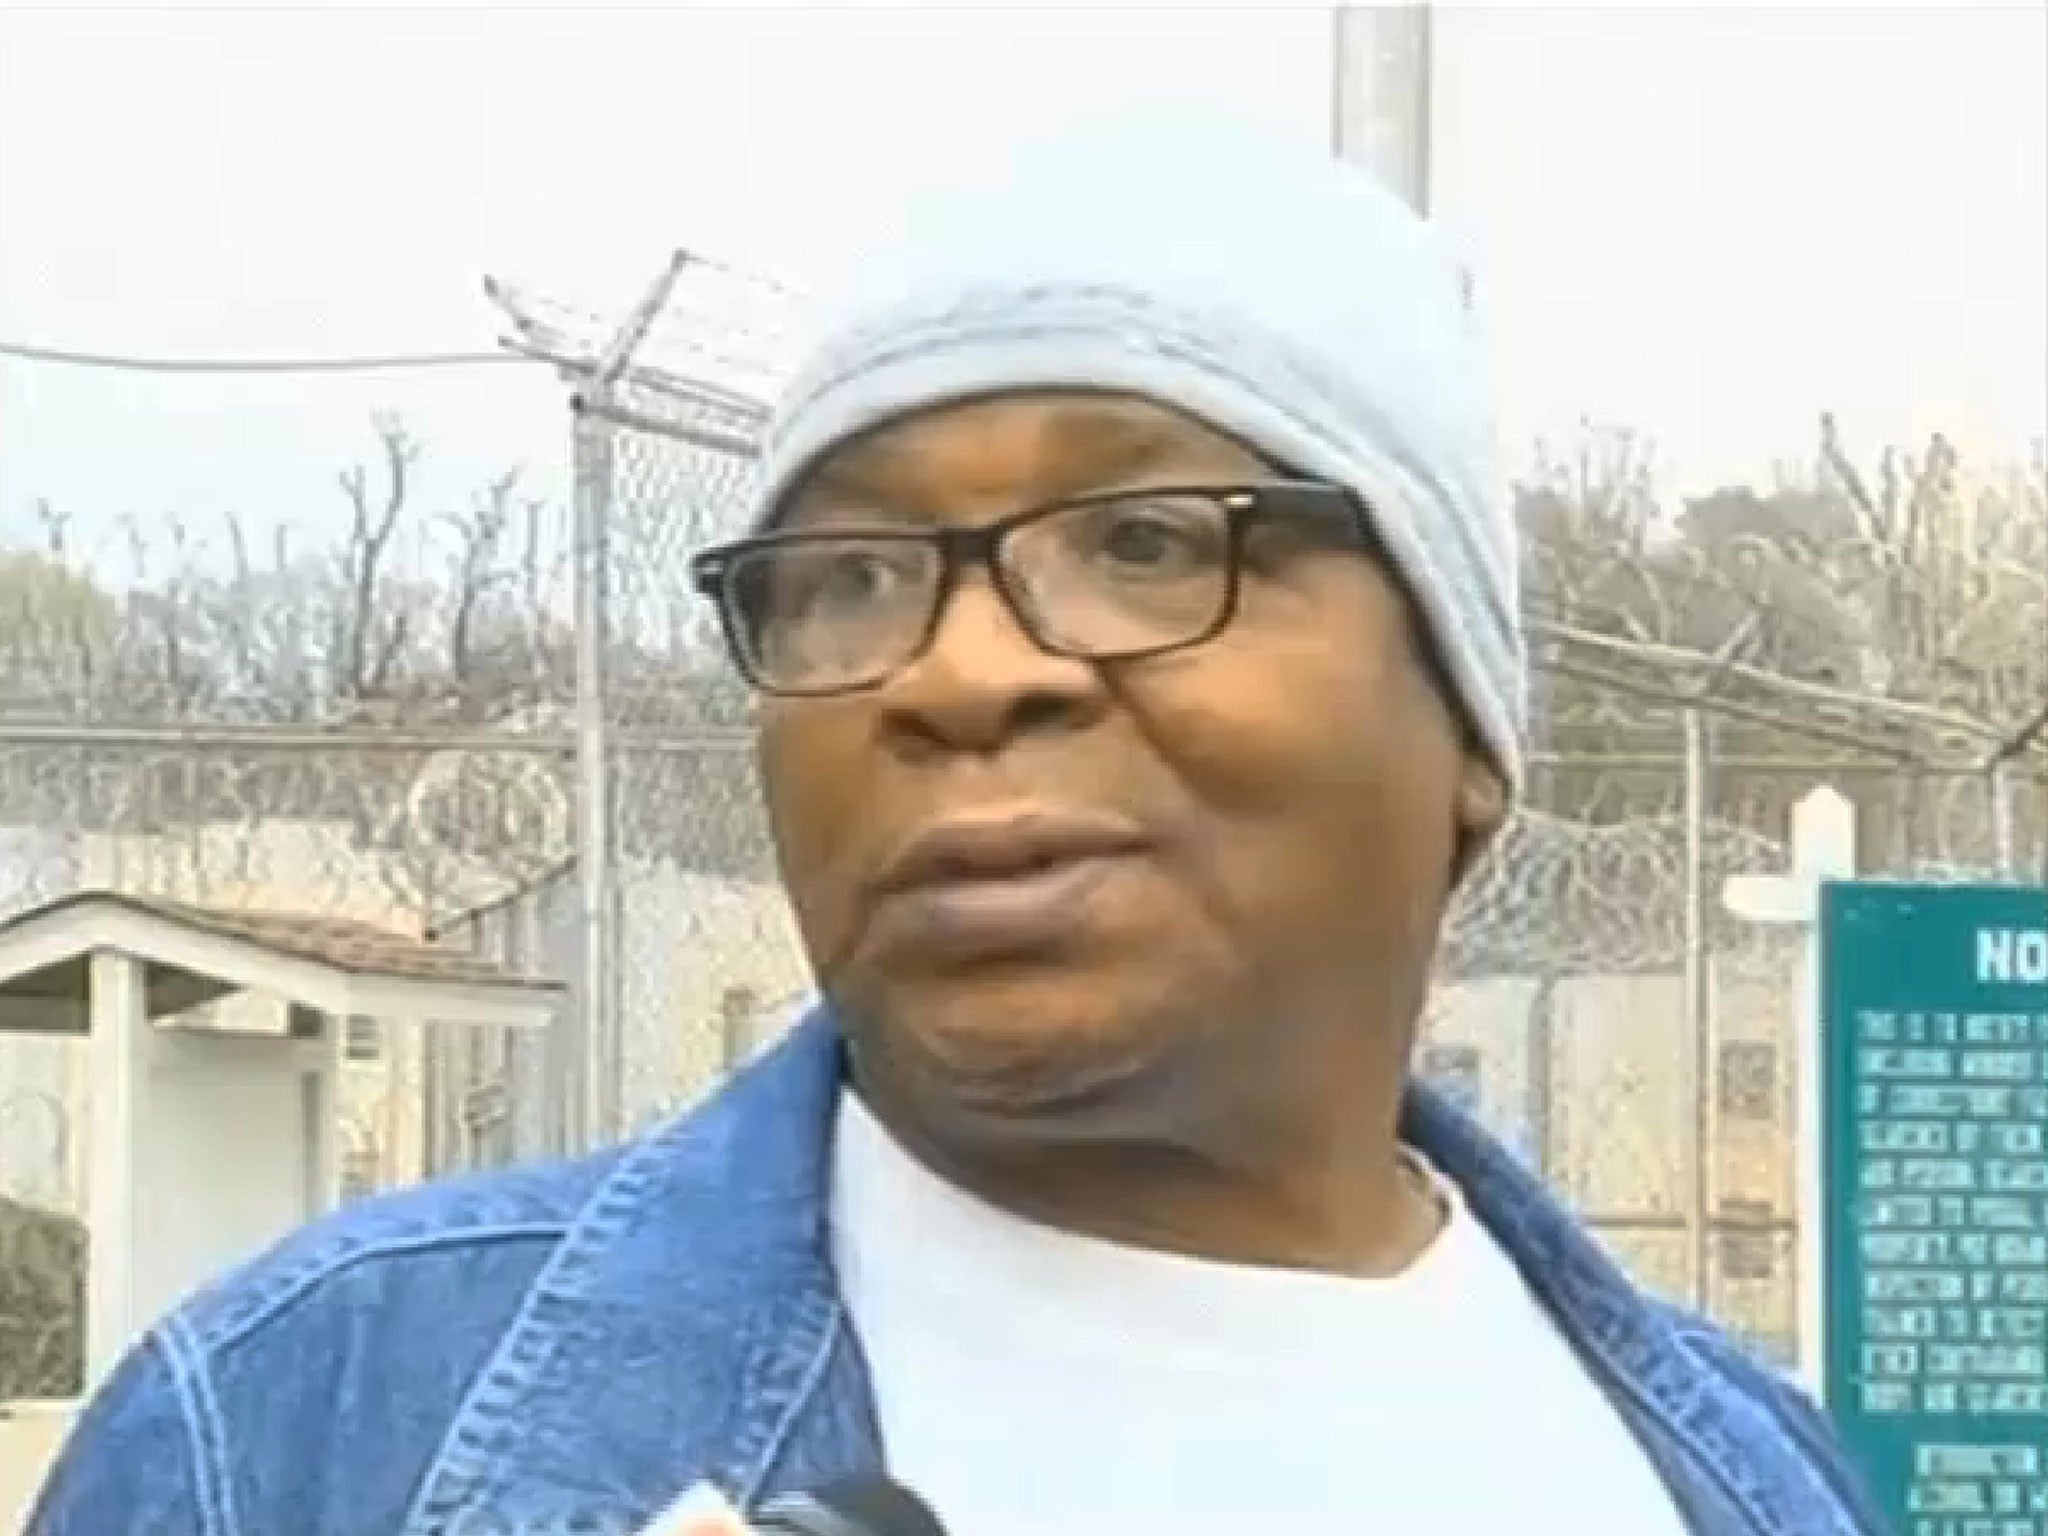 Glenn Ford talks to the media as he leaves a maximum security prison